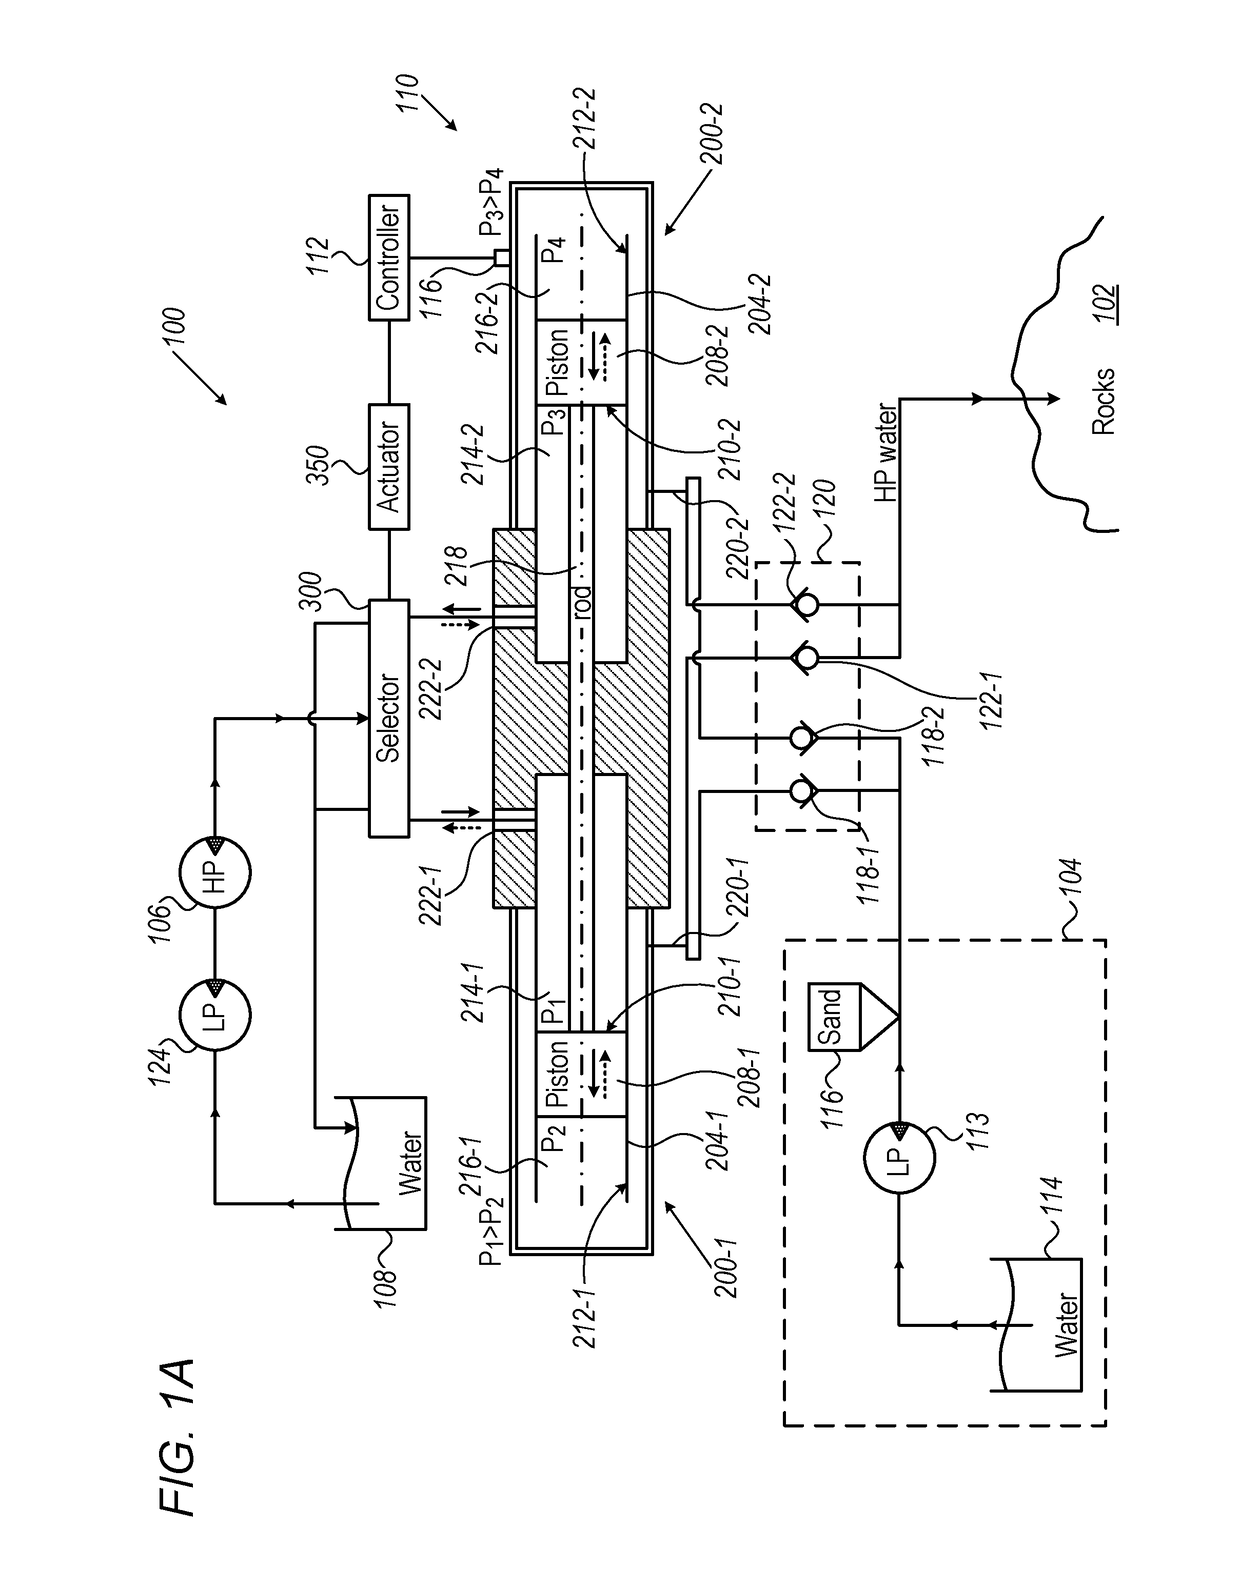 System and method for pumping a particle-laden fluid, such as pressurized fracking fluid